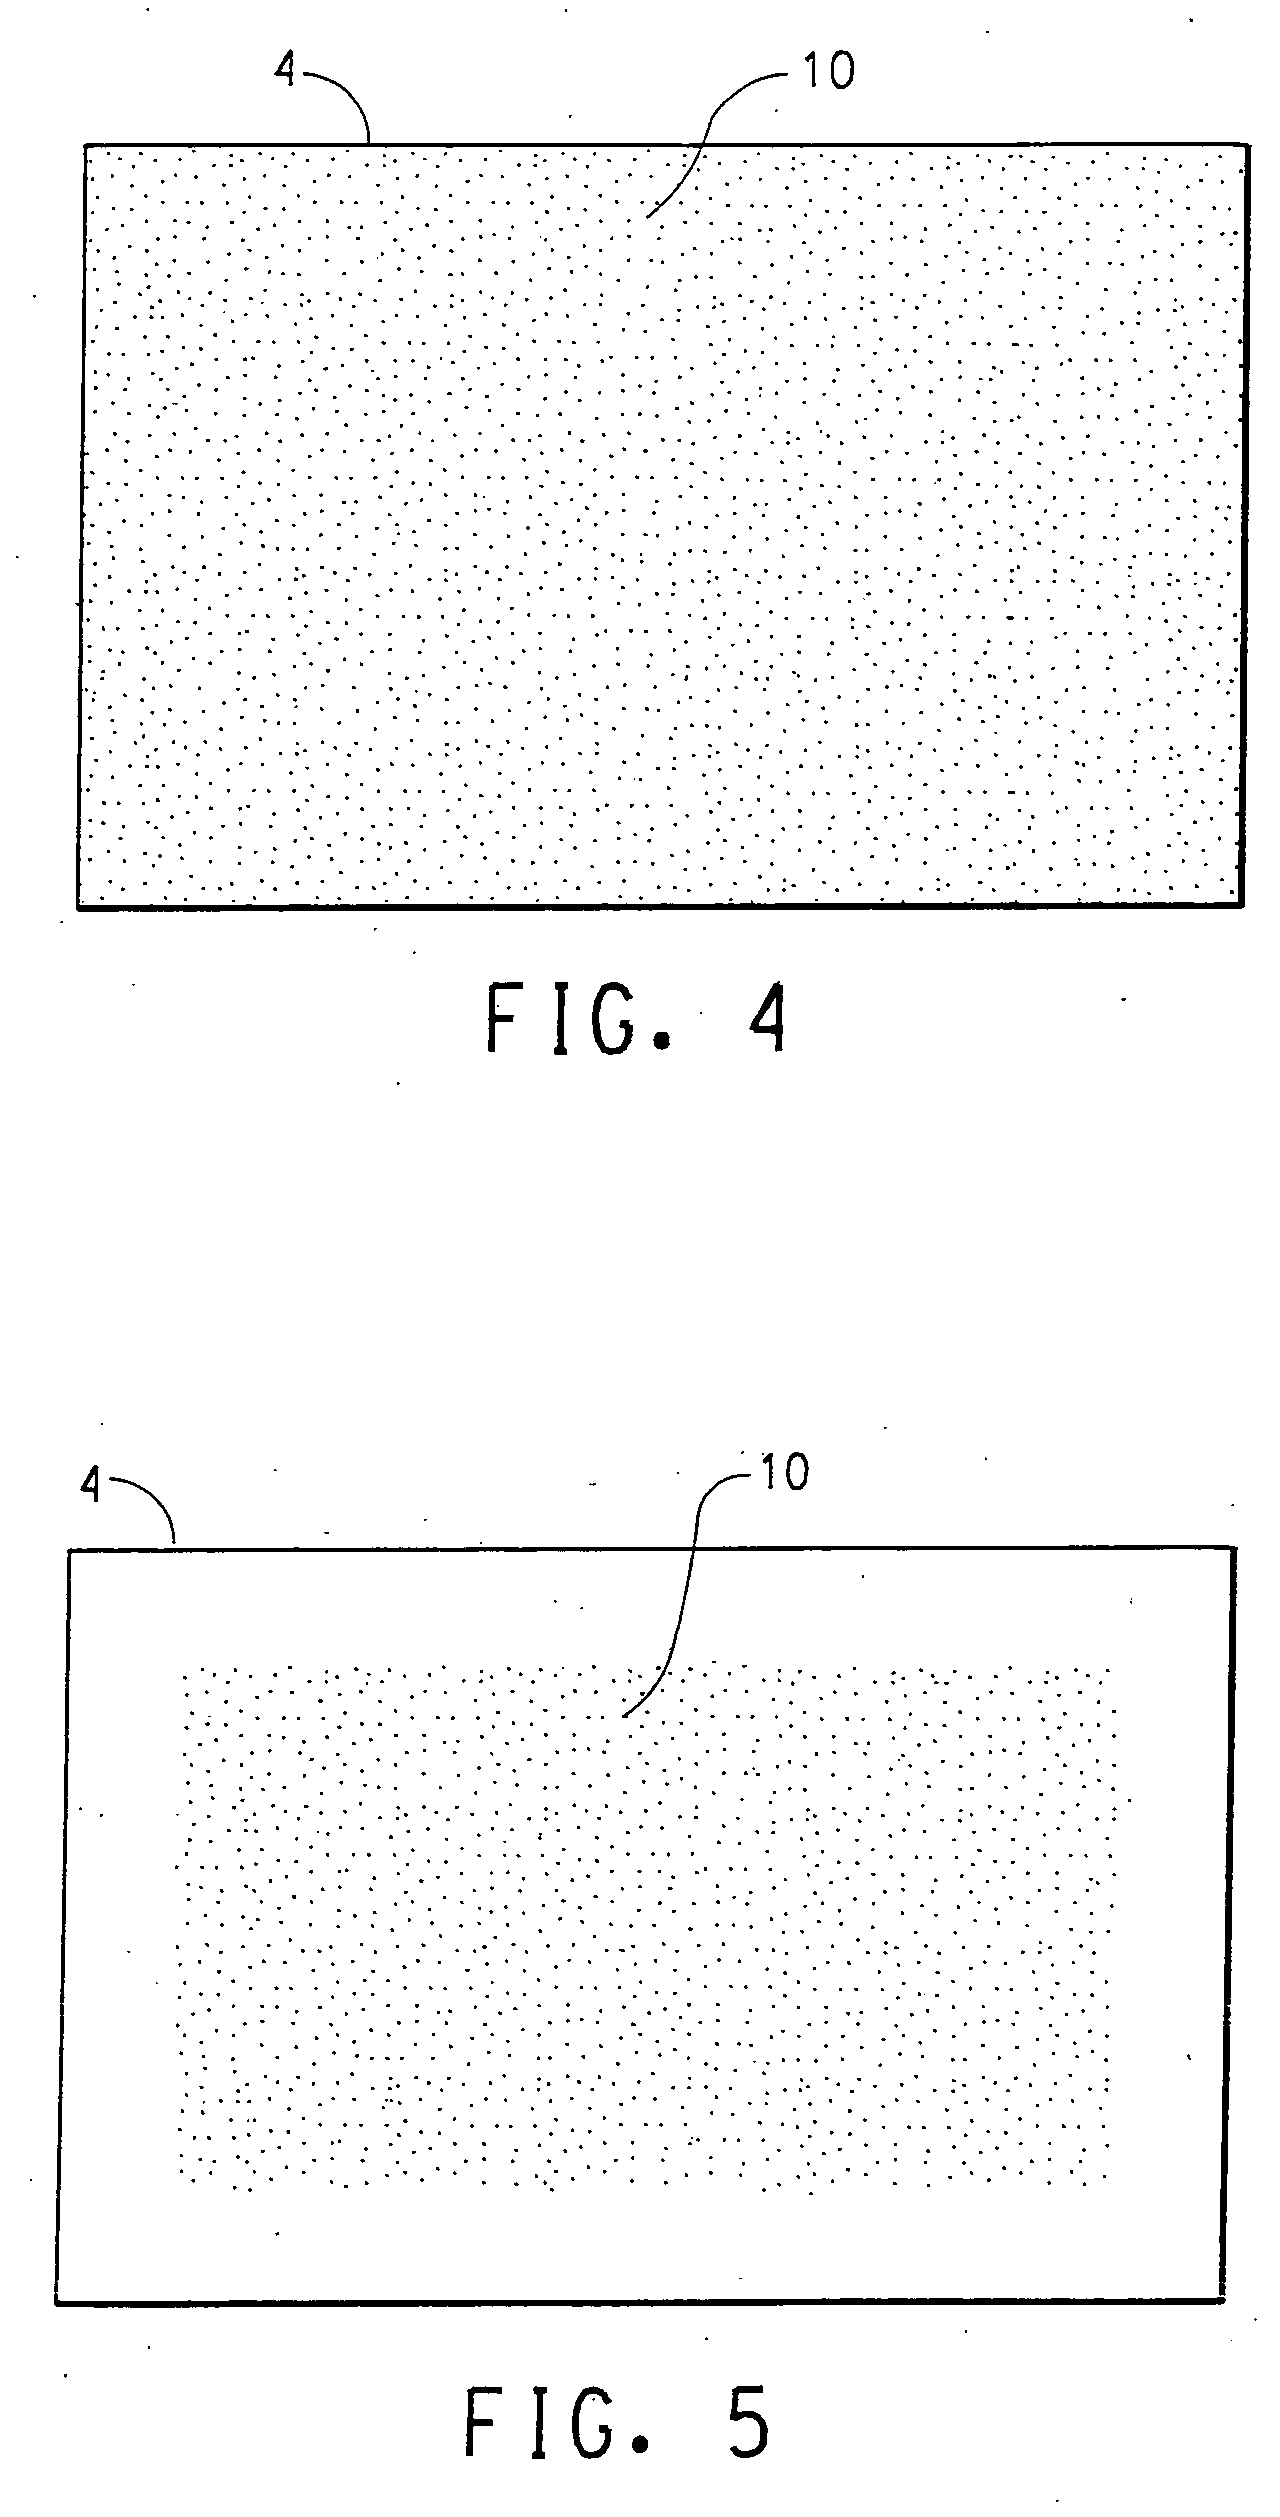 Method for encapsulating electronic devices and a sealing assembly for the electronic devices